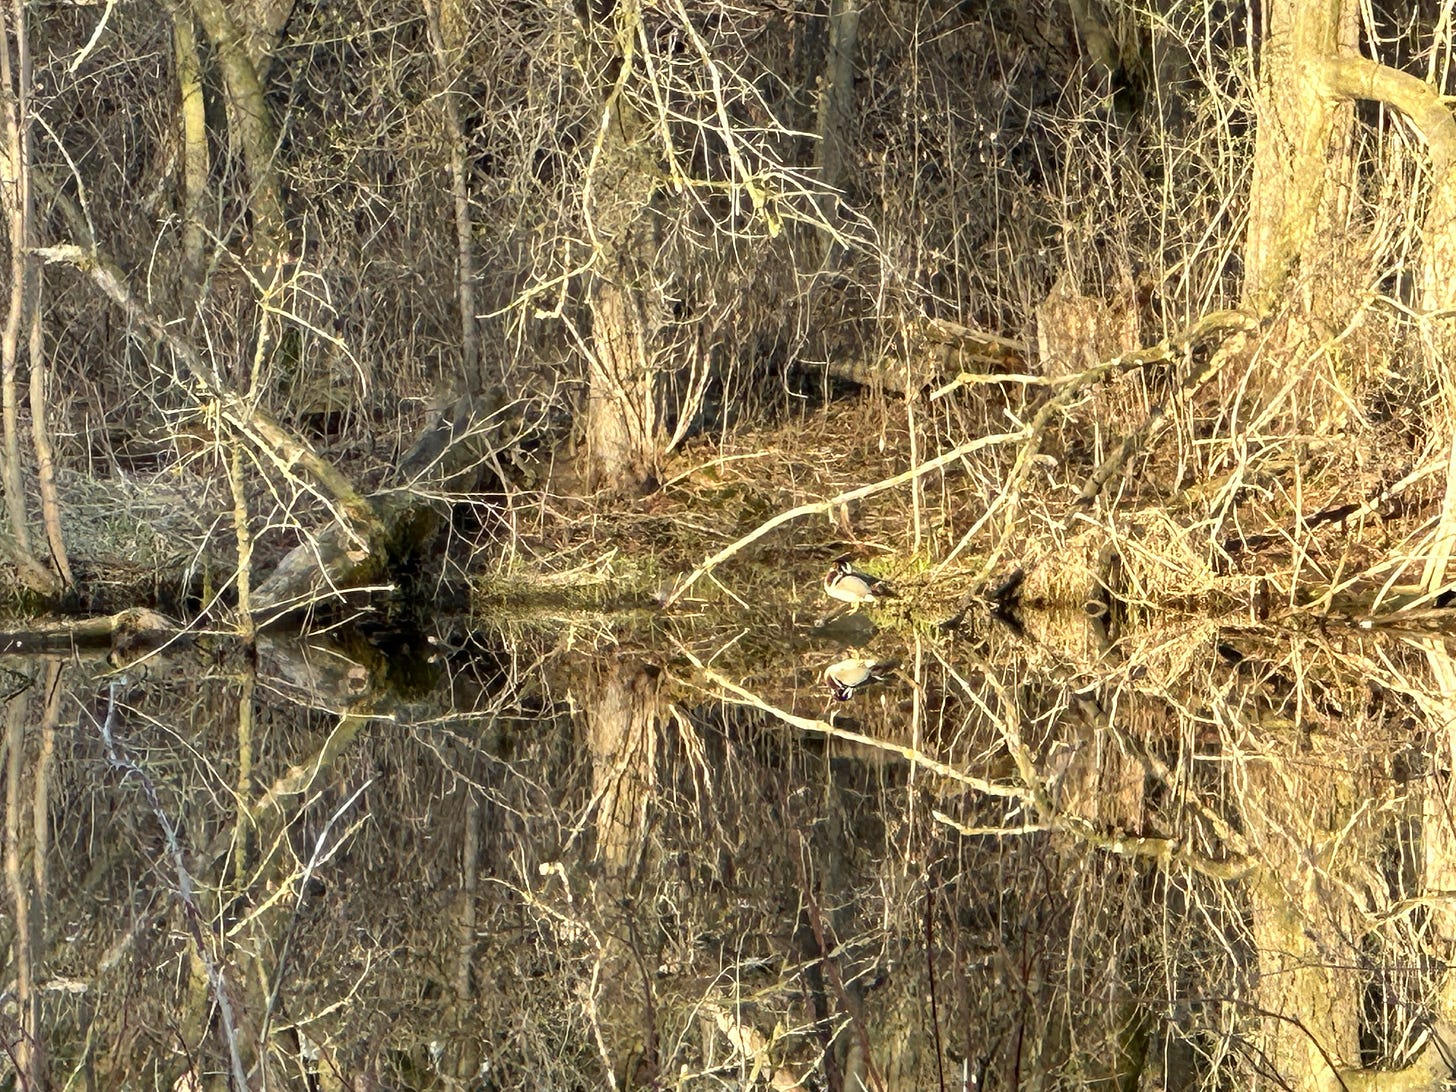 A wood duck sleeps on the far bank of a pond with a background of tangled, yet-to-bud trees and bushes.